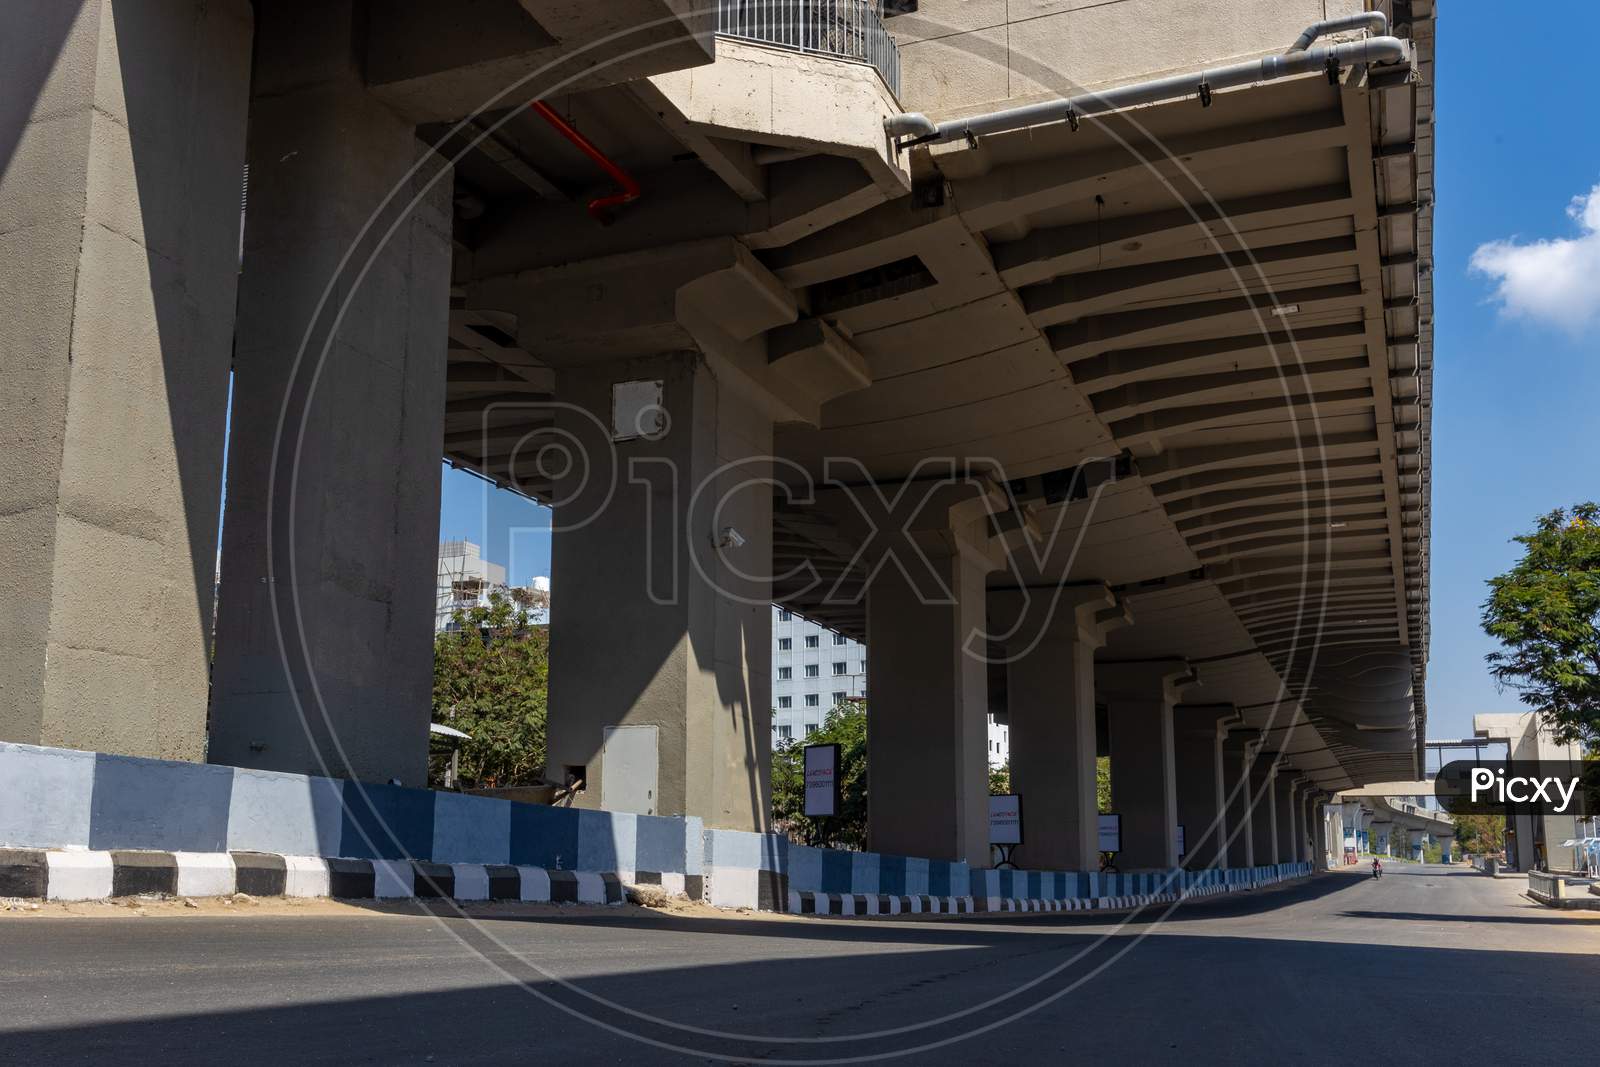 Janata Curfew, Deserted Roads At  Synchrony Raidurg Metro Station  in Hyderabad  As Indian Prime Minister Narendra Modi Called For a 14 Hour Janta  Curfew Or Self-imposed  Quarantine To Break The  Highly Contagious  COVID 19 Or Corona Virus Spread